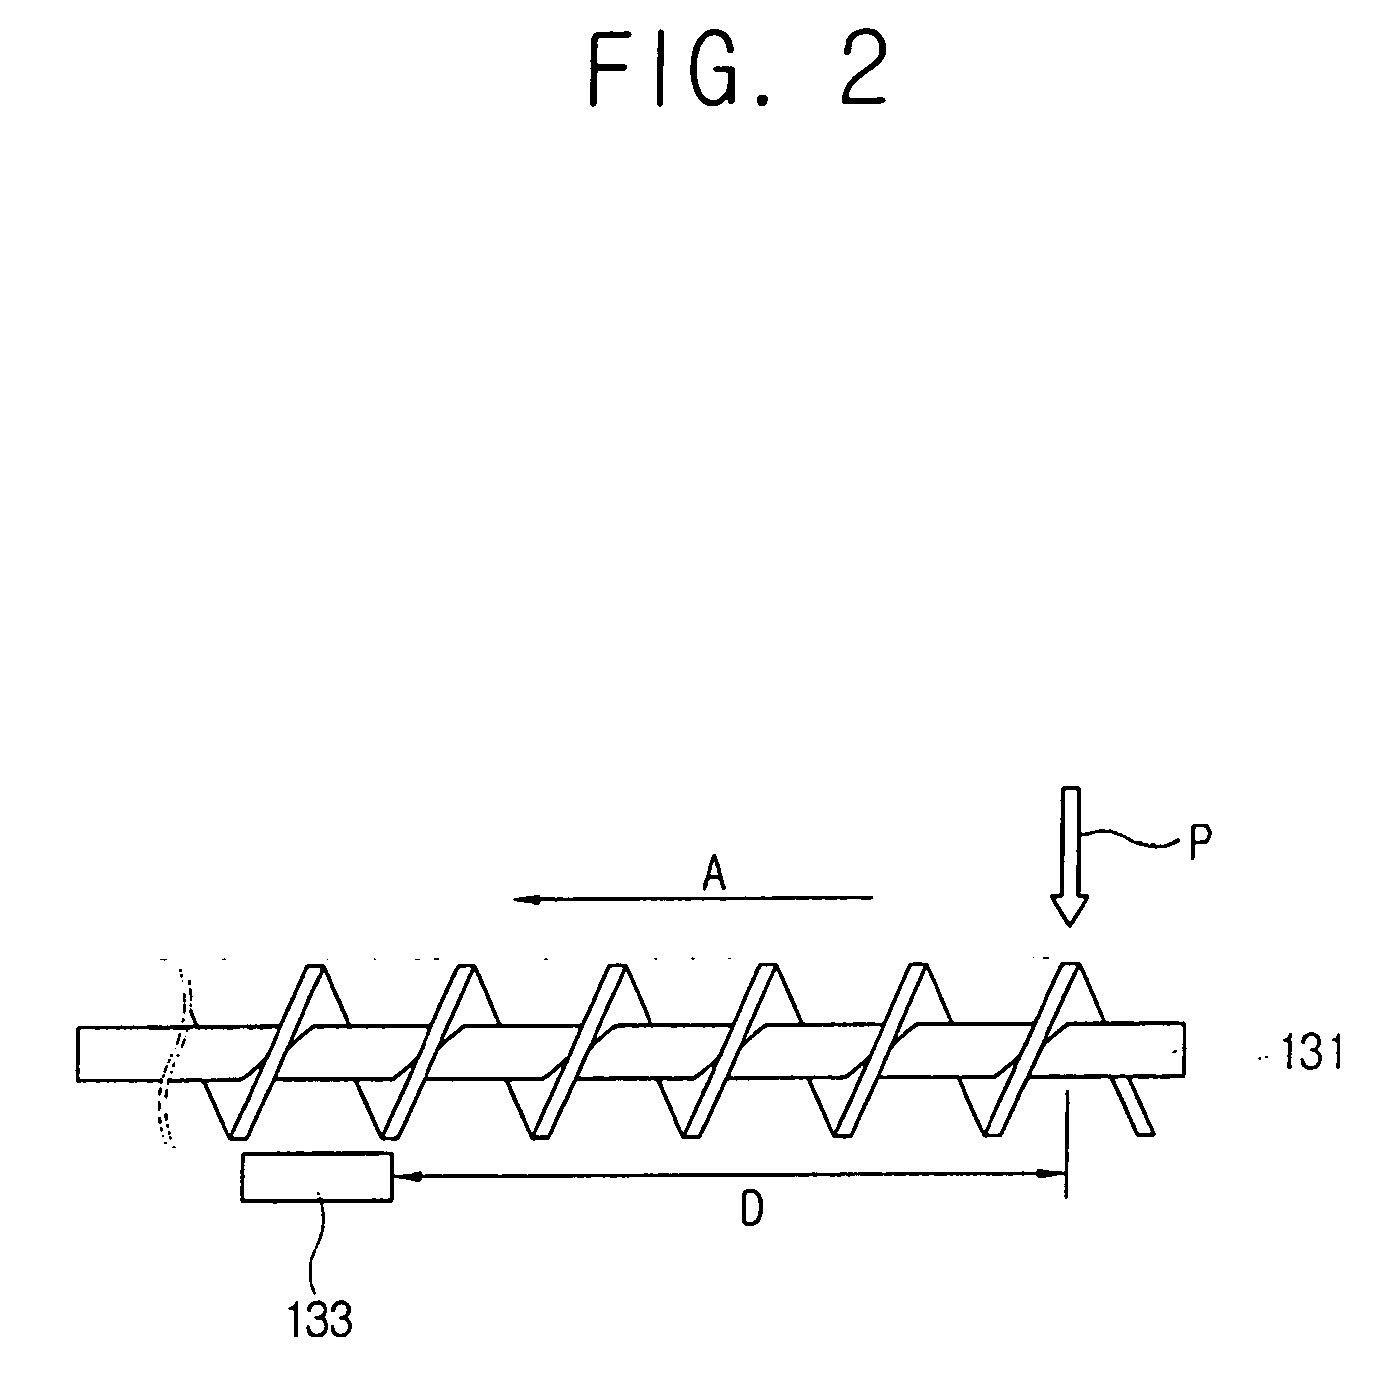 Image forming apparatus capable controlling toner supply